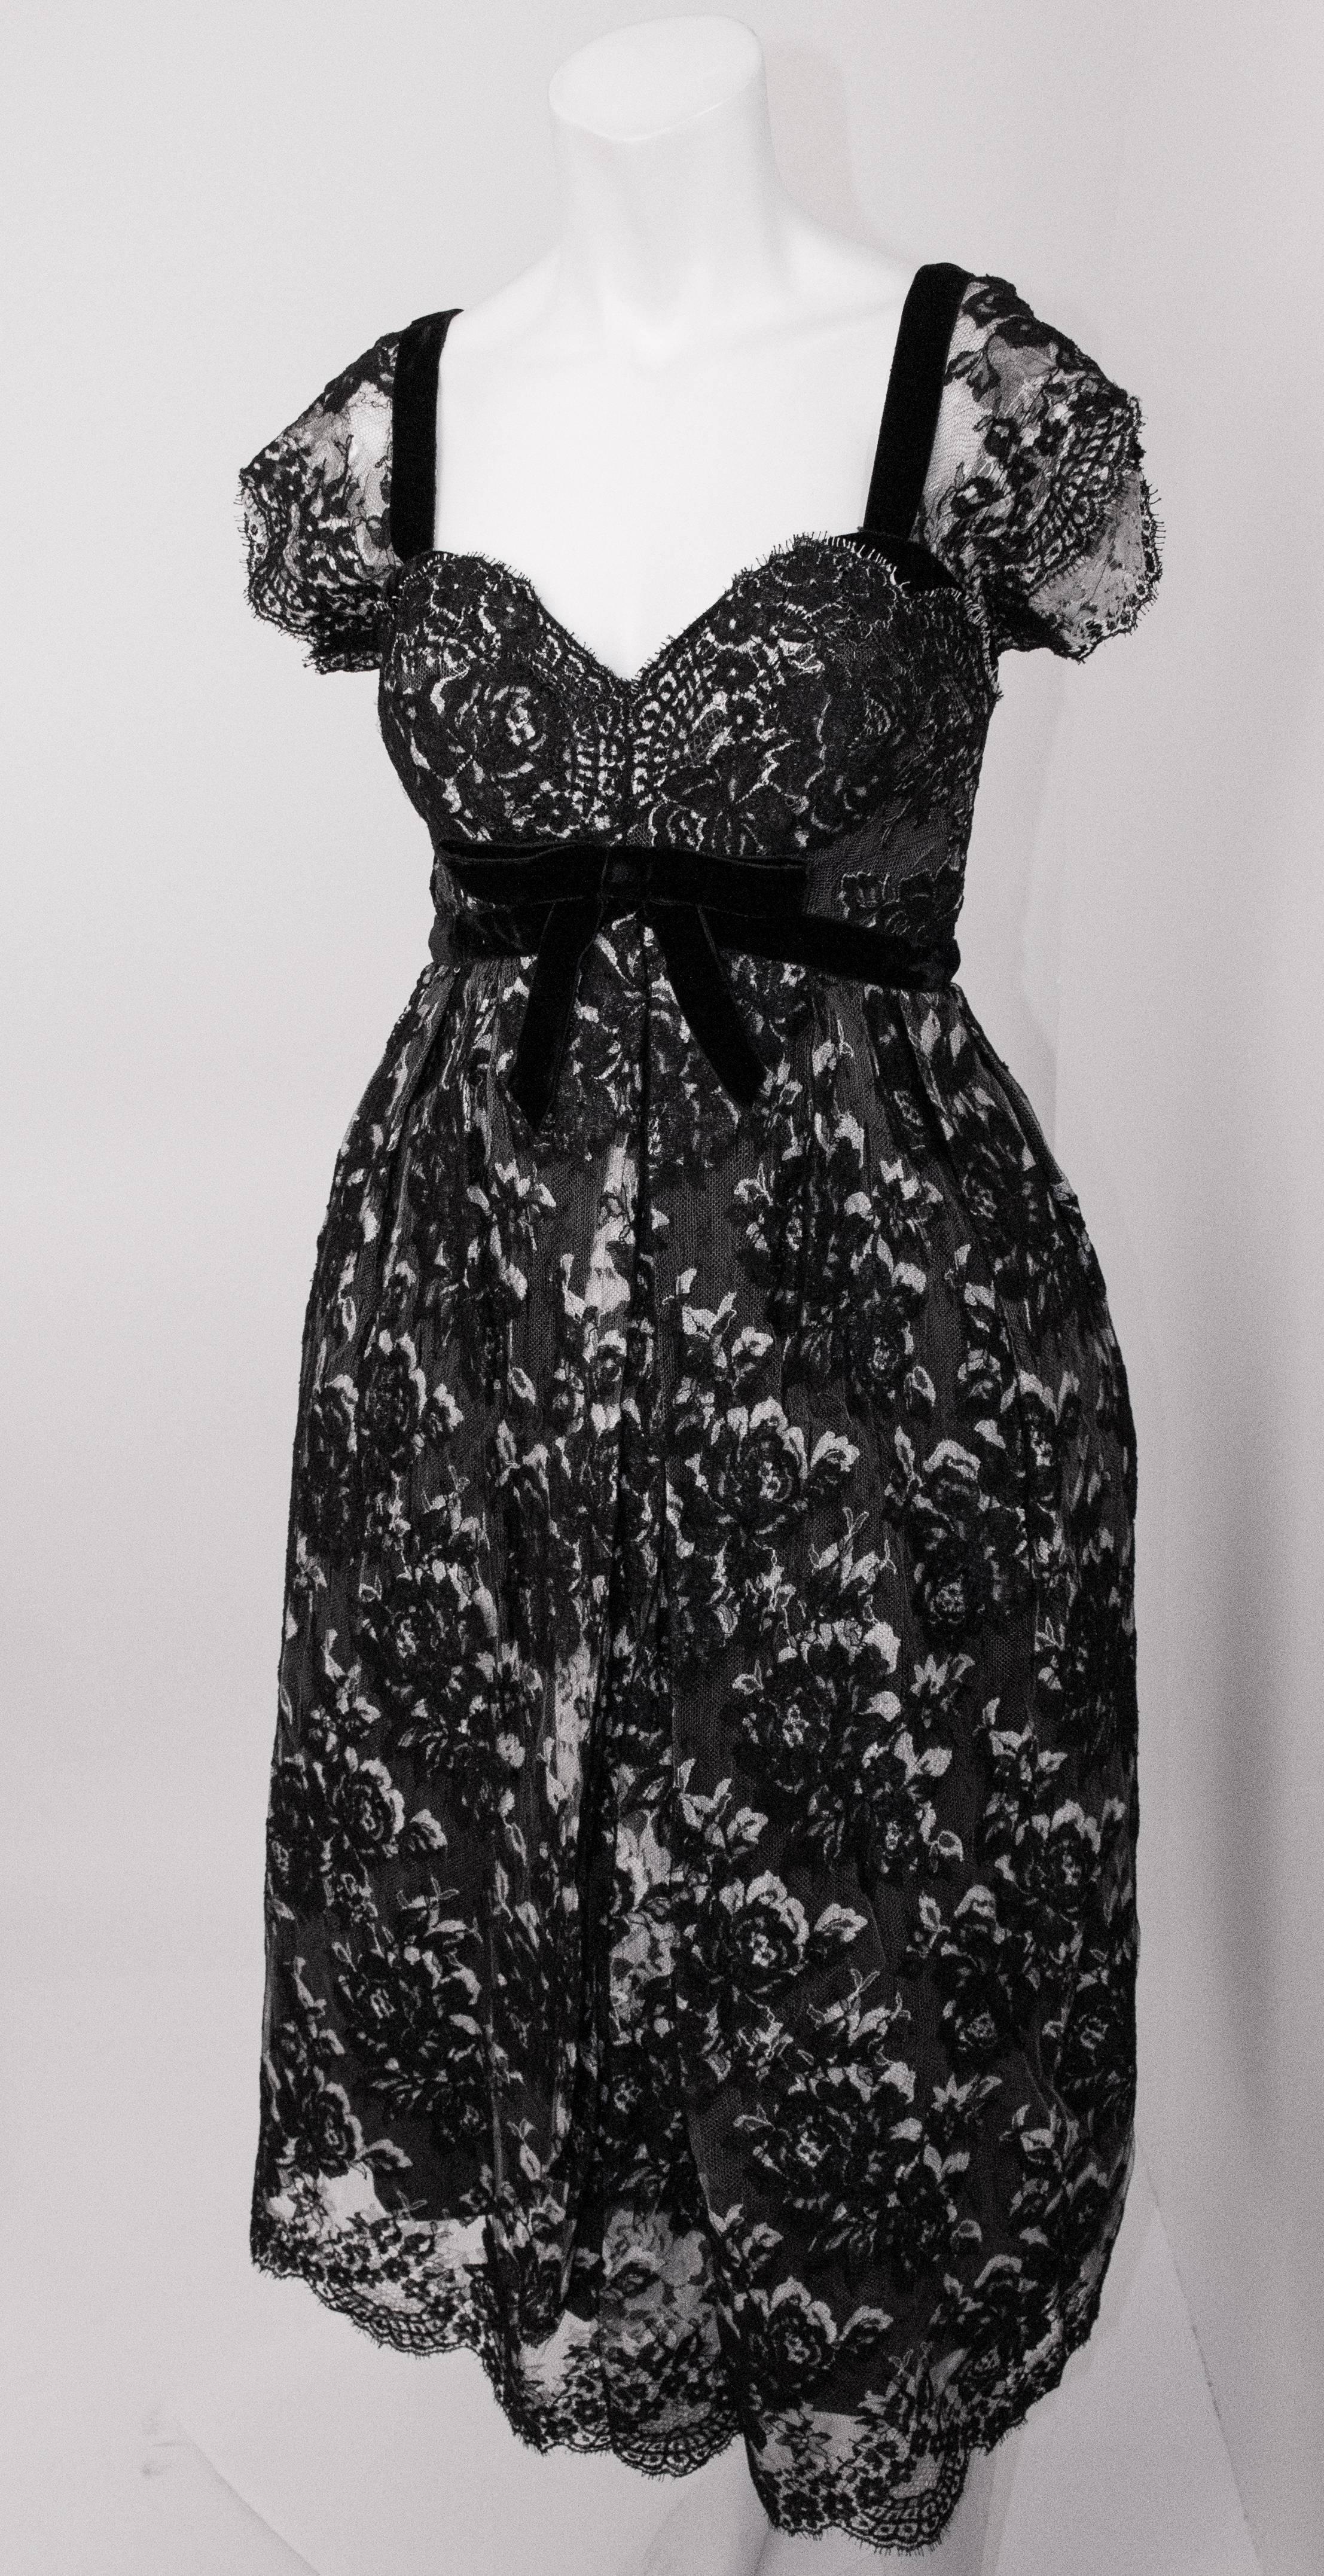 50s Black & White Lace Cocktail Dress. The black lace is layered over white lace. Velvet trim on bodice. Built in layered tulle petticoat. Grosgrain waist band hooks closed. Fully lined. 